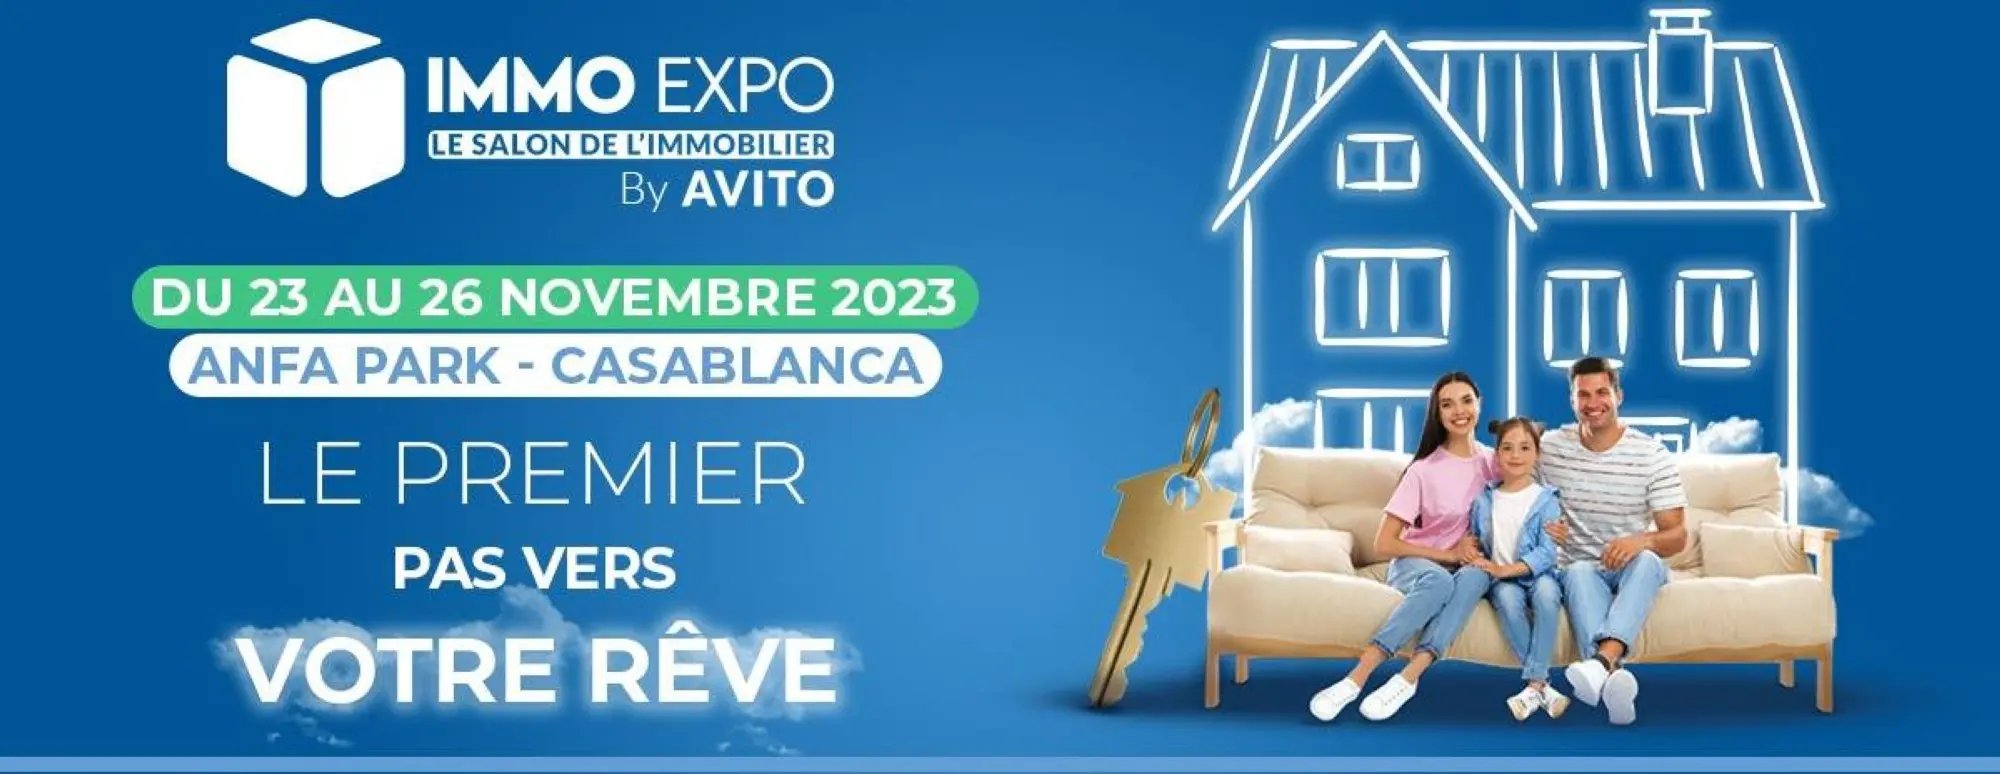 immo-expo-2023-les-offres-immobilier-avito